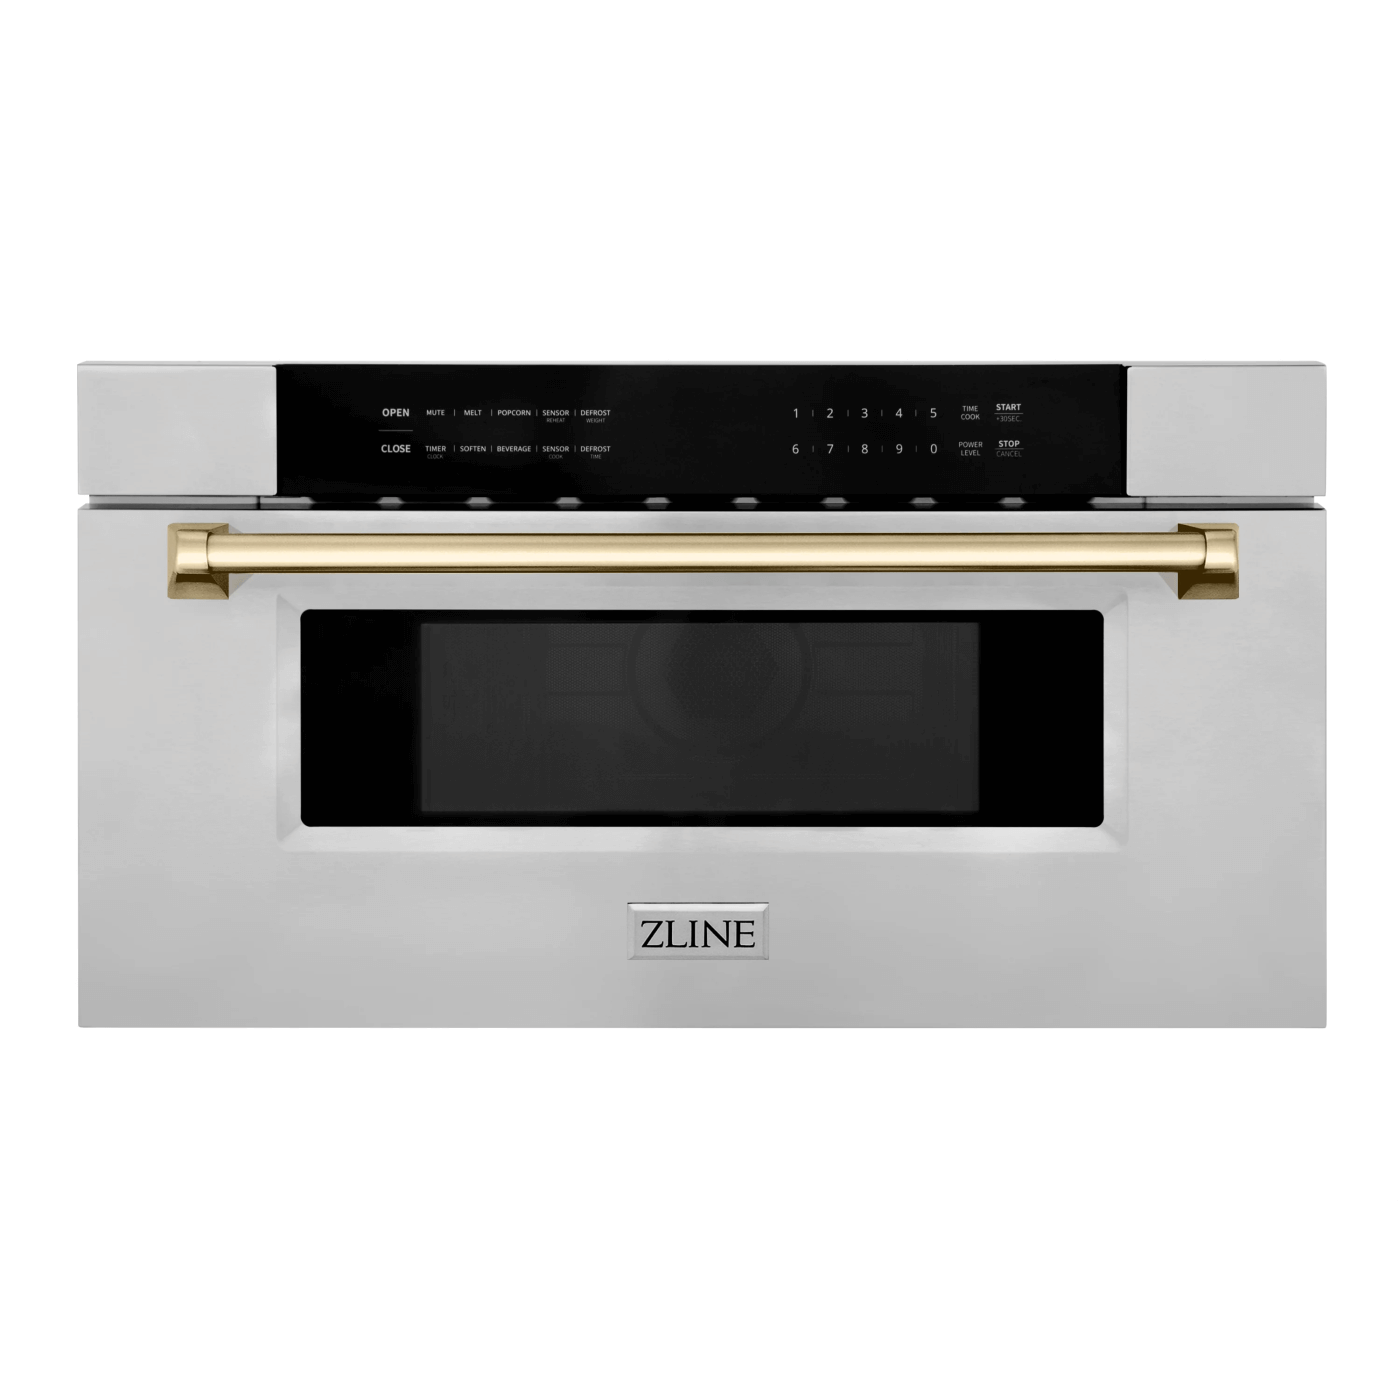 ZLINE 30 in. Microwave Drawer in Stainless Steel with Champagne Bronze Accents